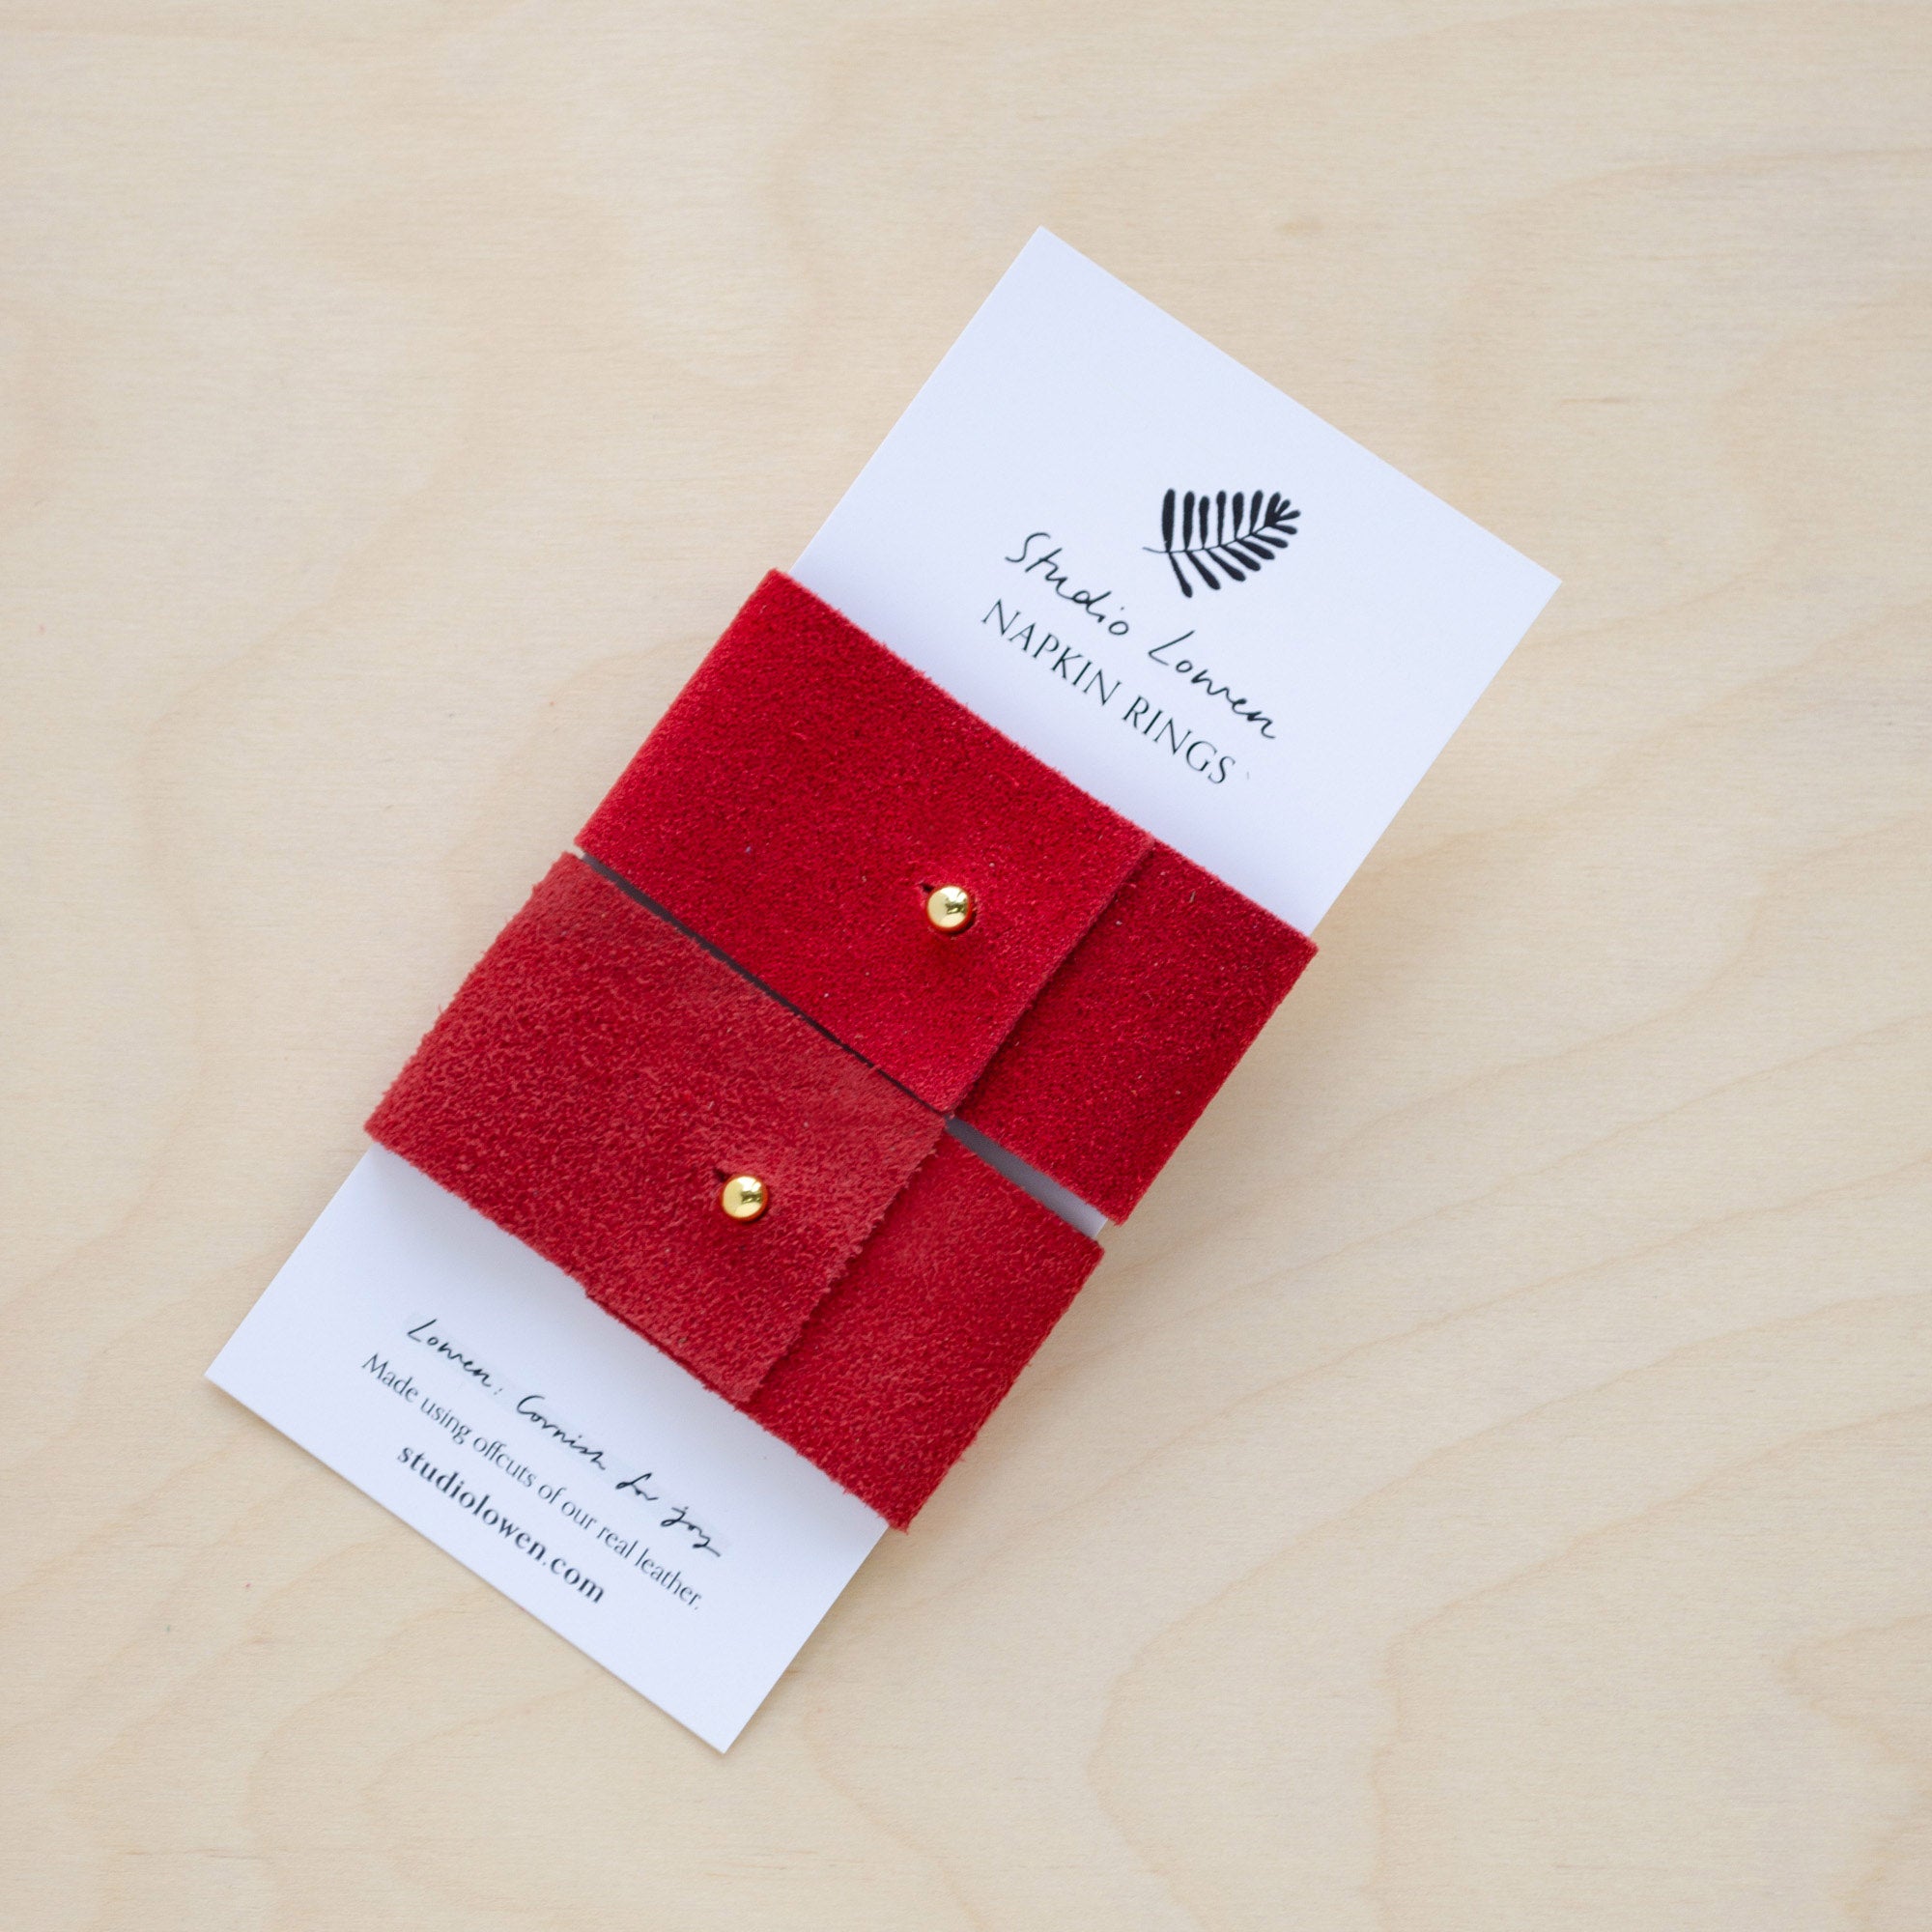 Crimson Red suede leather napkin ring with gold stud.